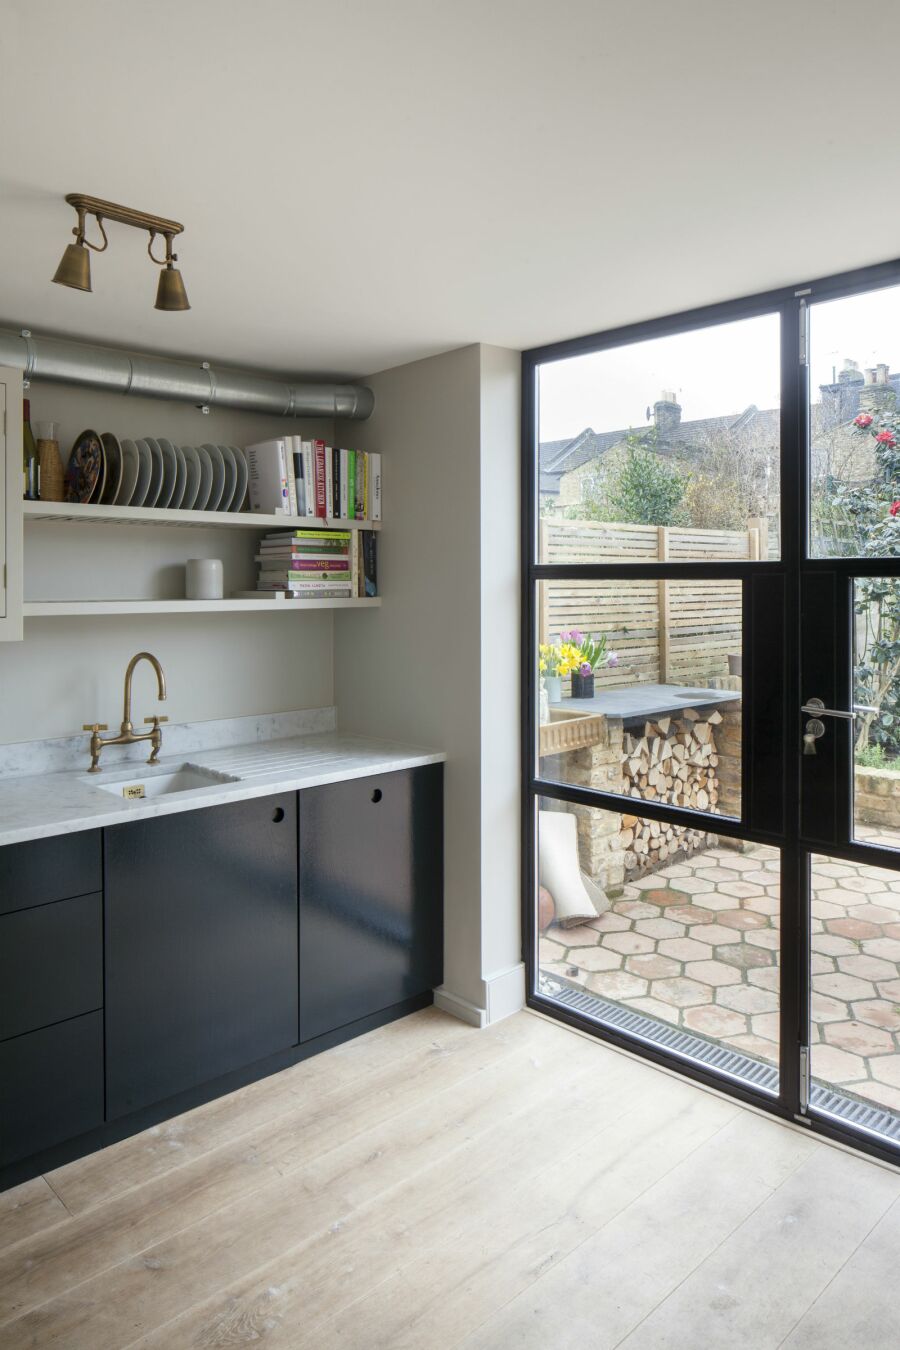 Kitchen with crittall window style doors leading to garden.